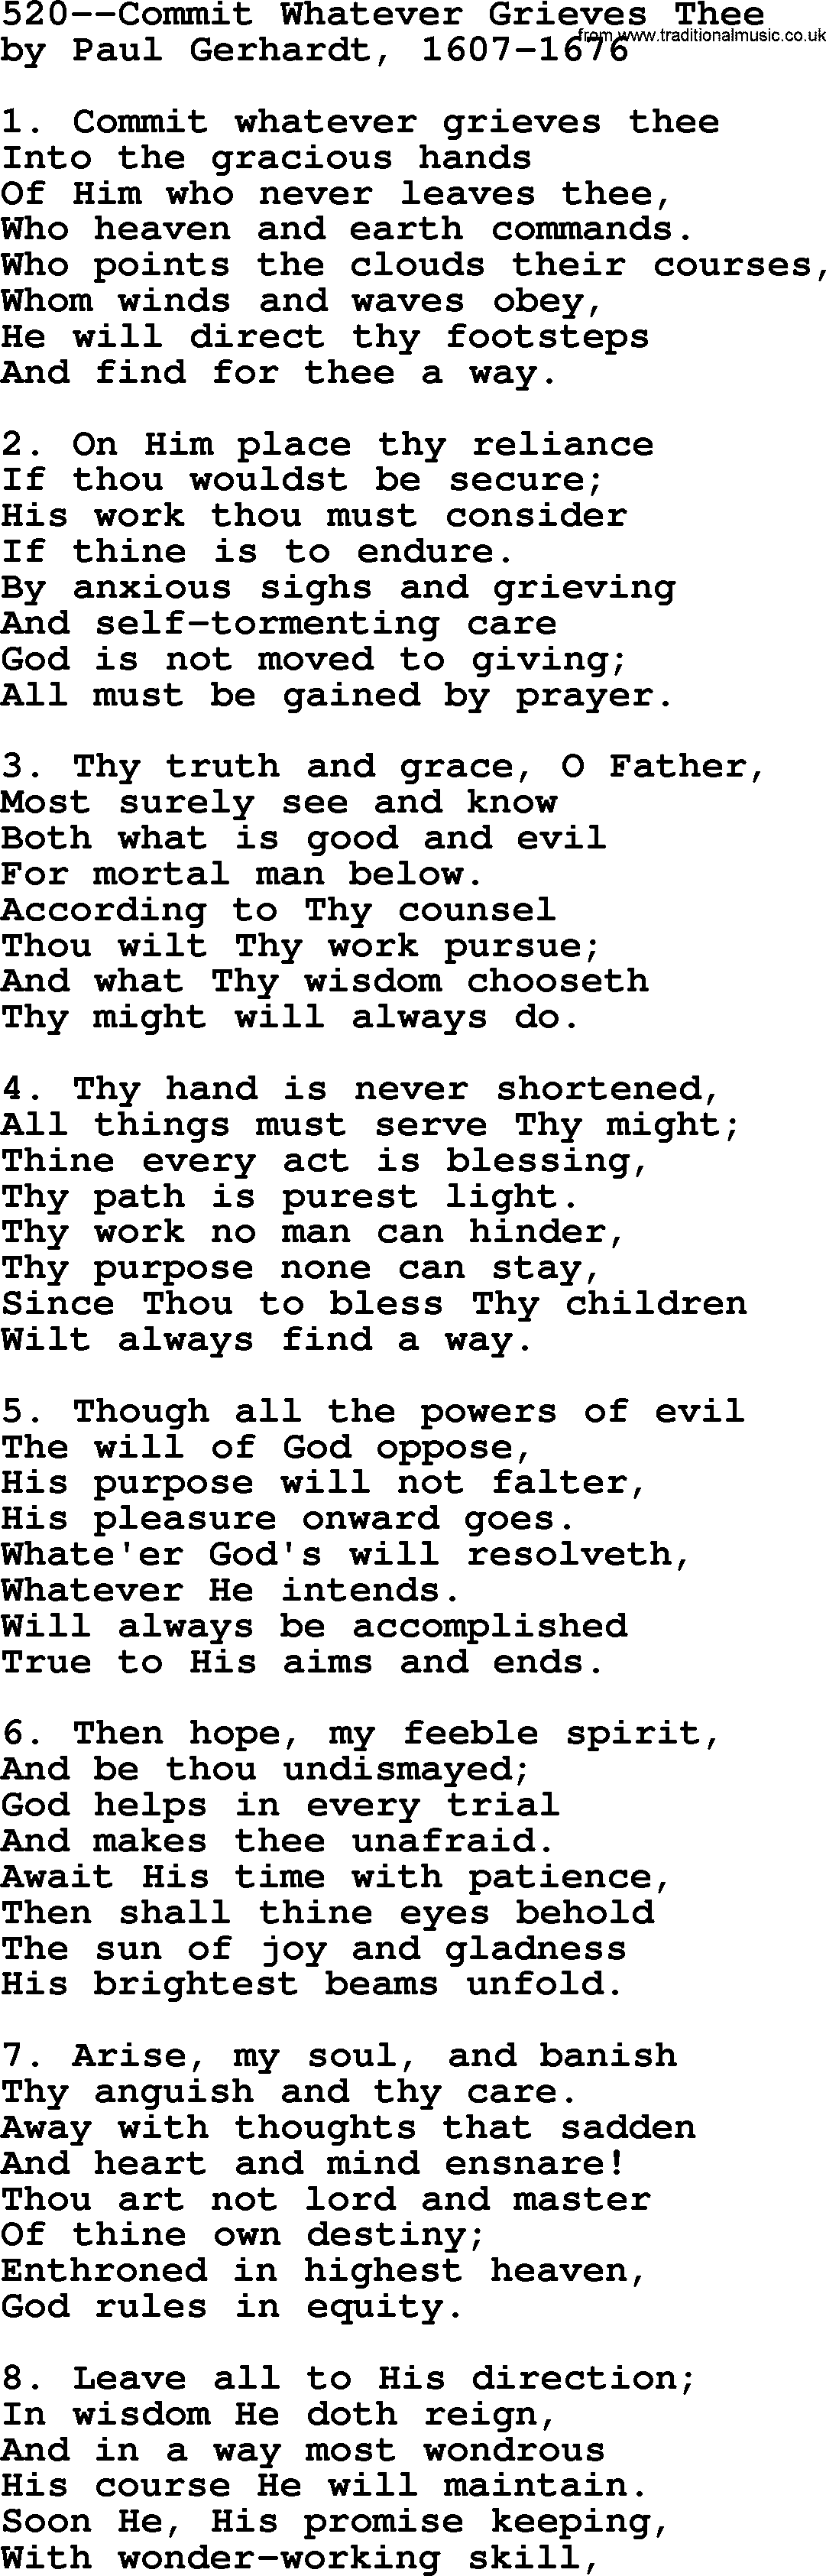 Lutheran Hymn: 520--Commit Whatever Grieves Thee.txt lyrics with PDF